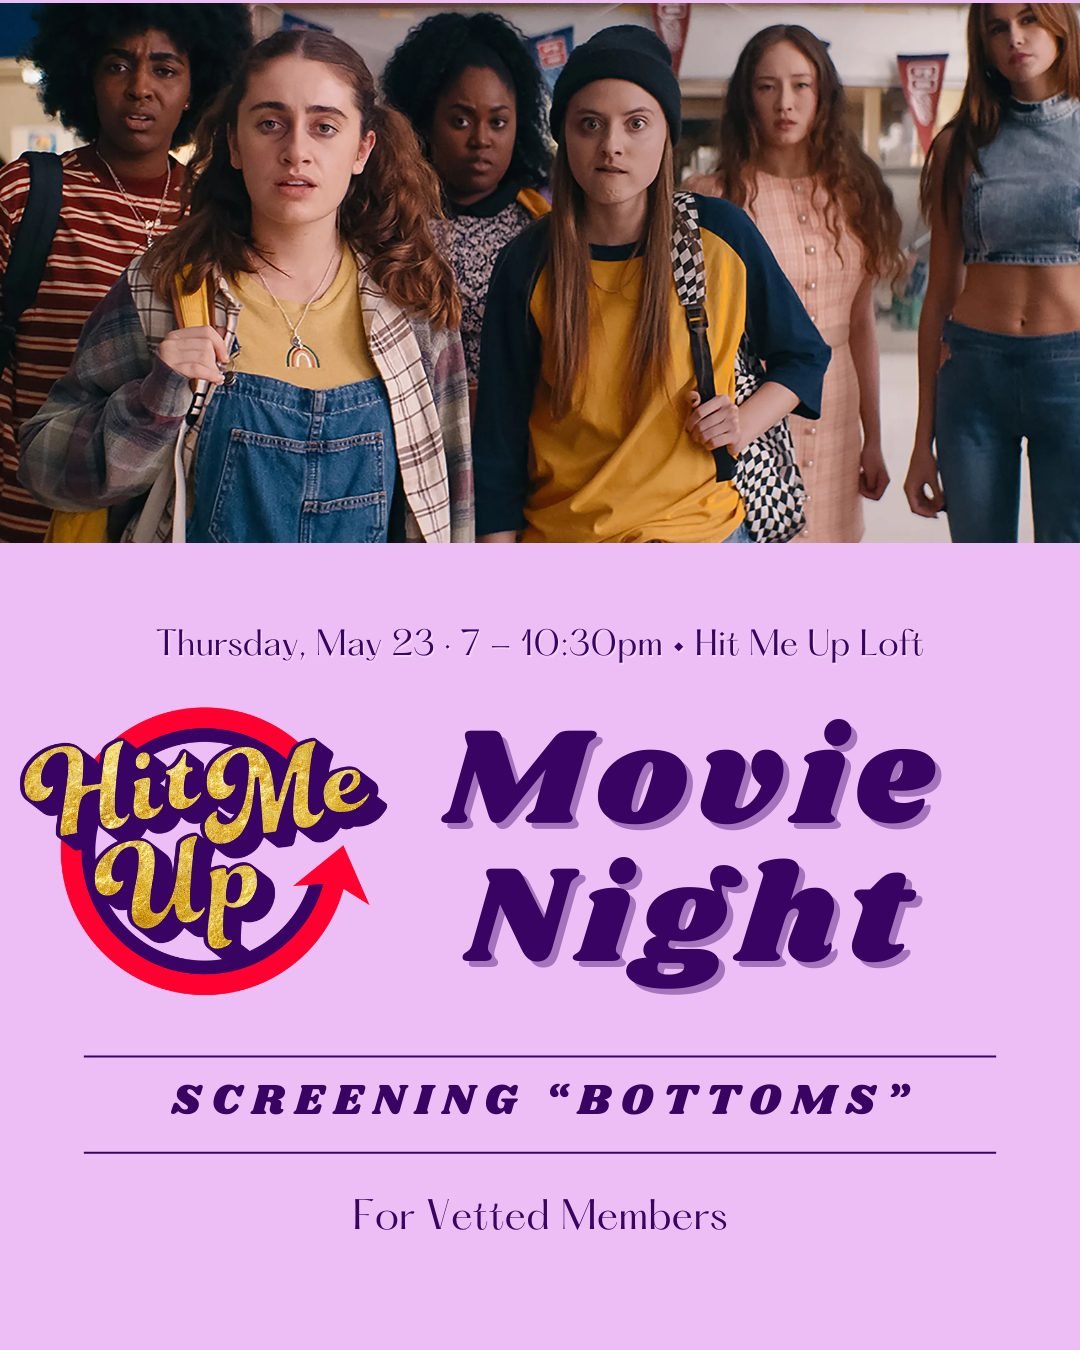 Calling all (vetted) BOTTOMS! Get ready for our cozy movie night on Thursday, May 23rd. You know where to get your tickets 🥰